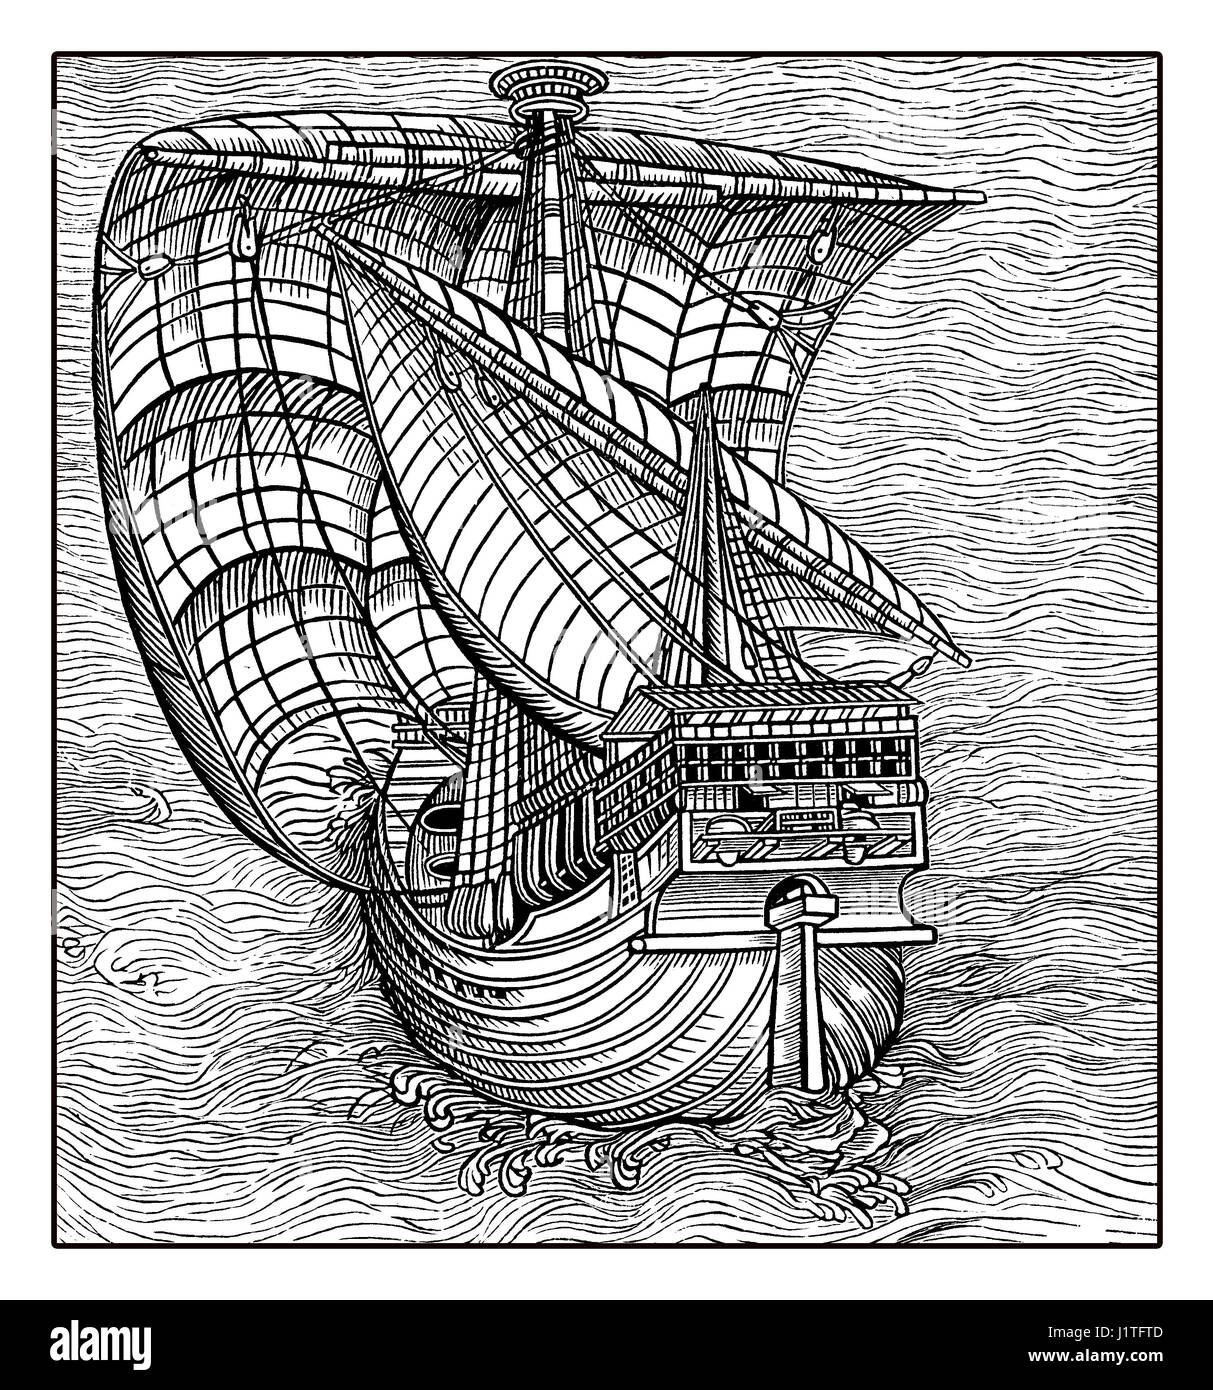 Galleon on the sea navigating with sails full of wind, medieval engraving Stock Photo